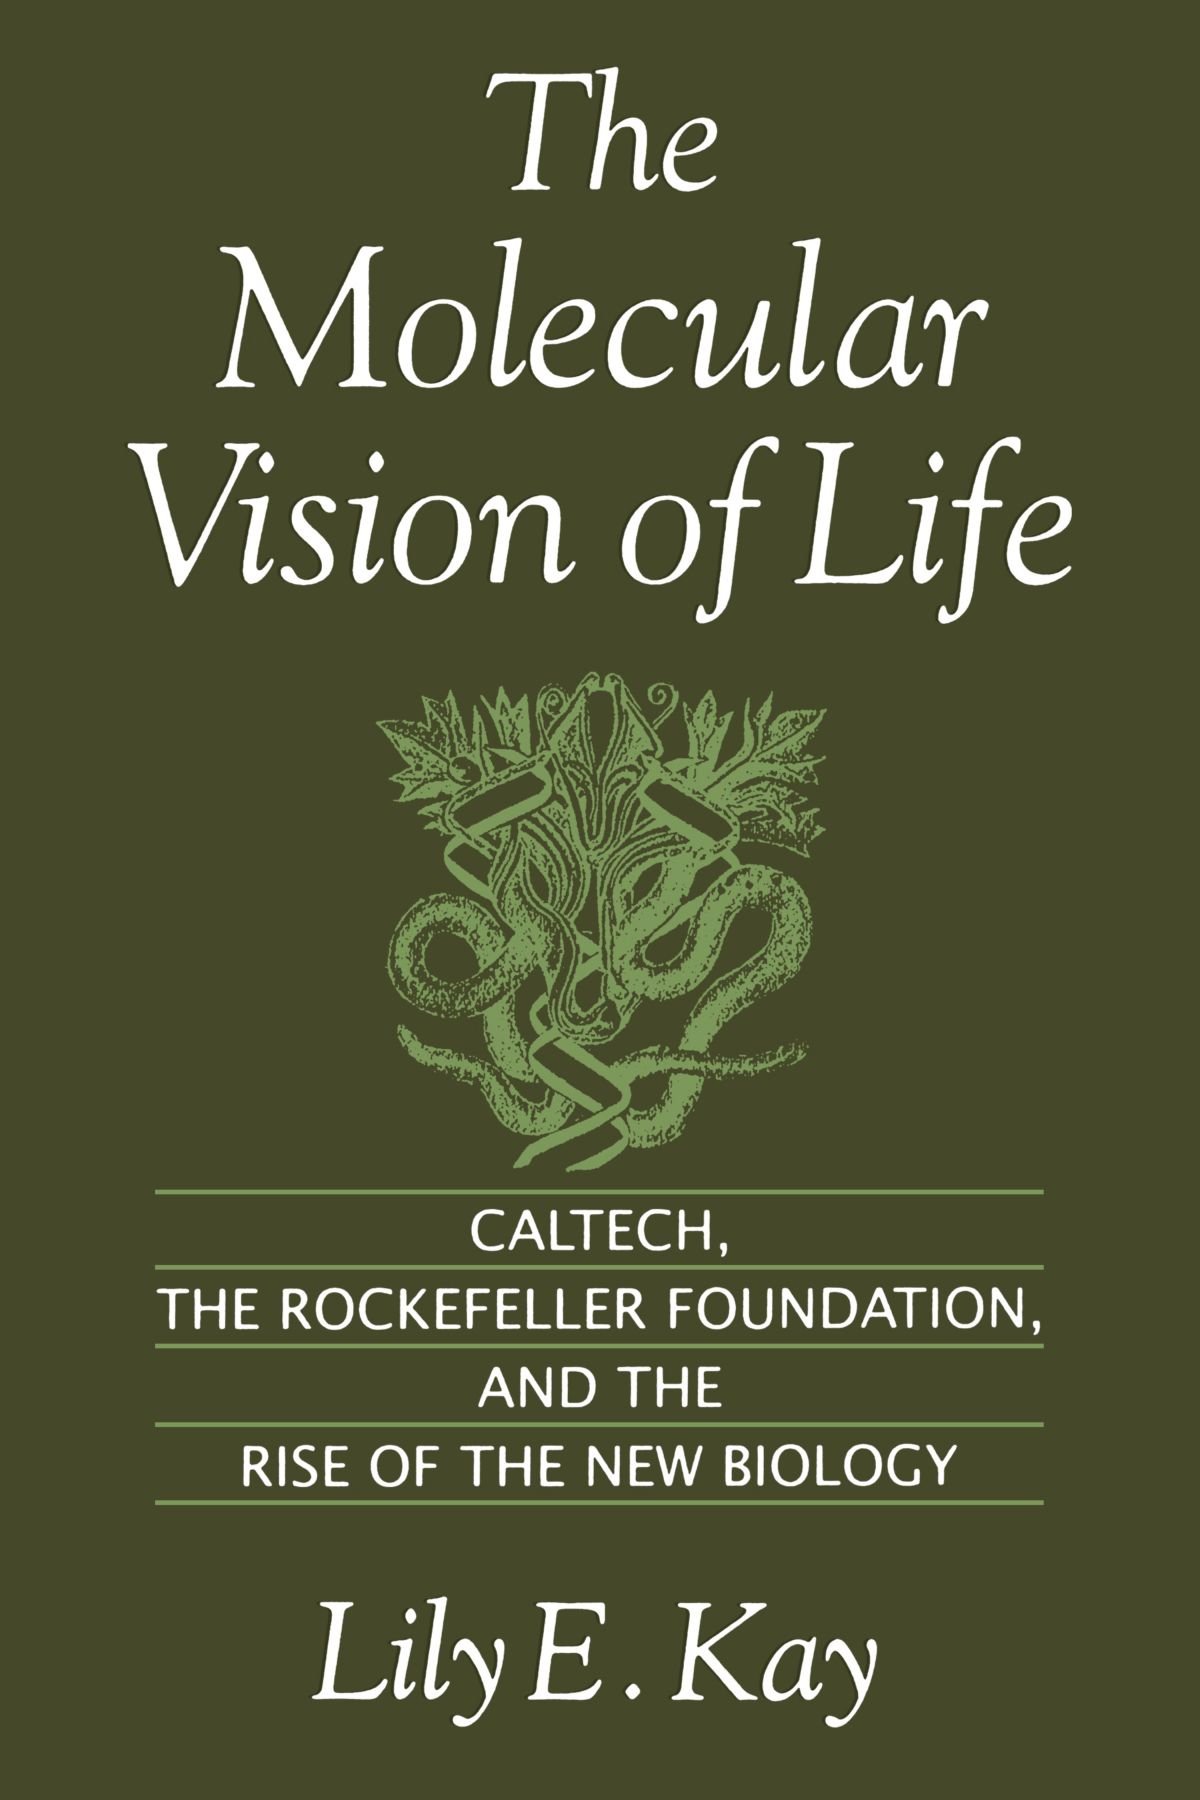 The Molecular Vision of Life - Caltech the Rockefeller Foundation and the Rise of the New Biology